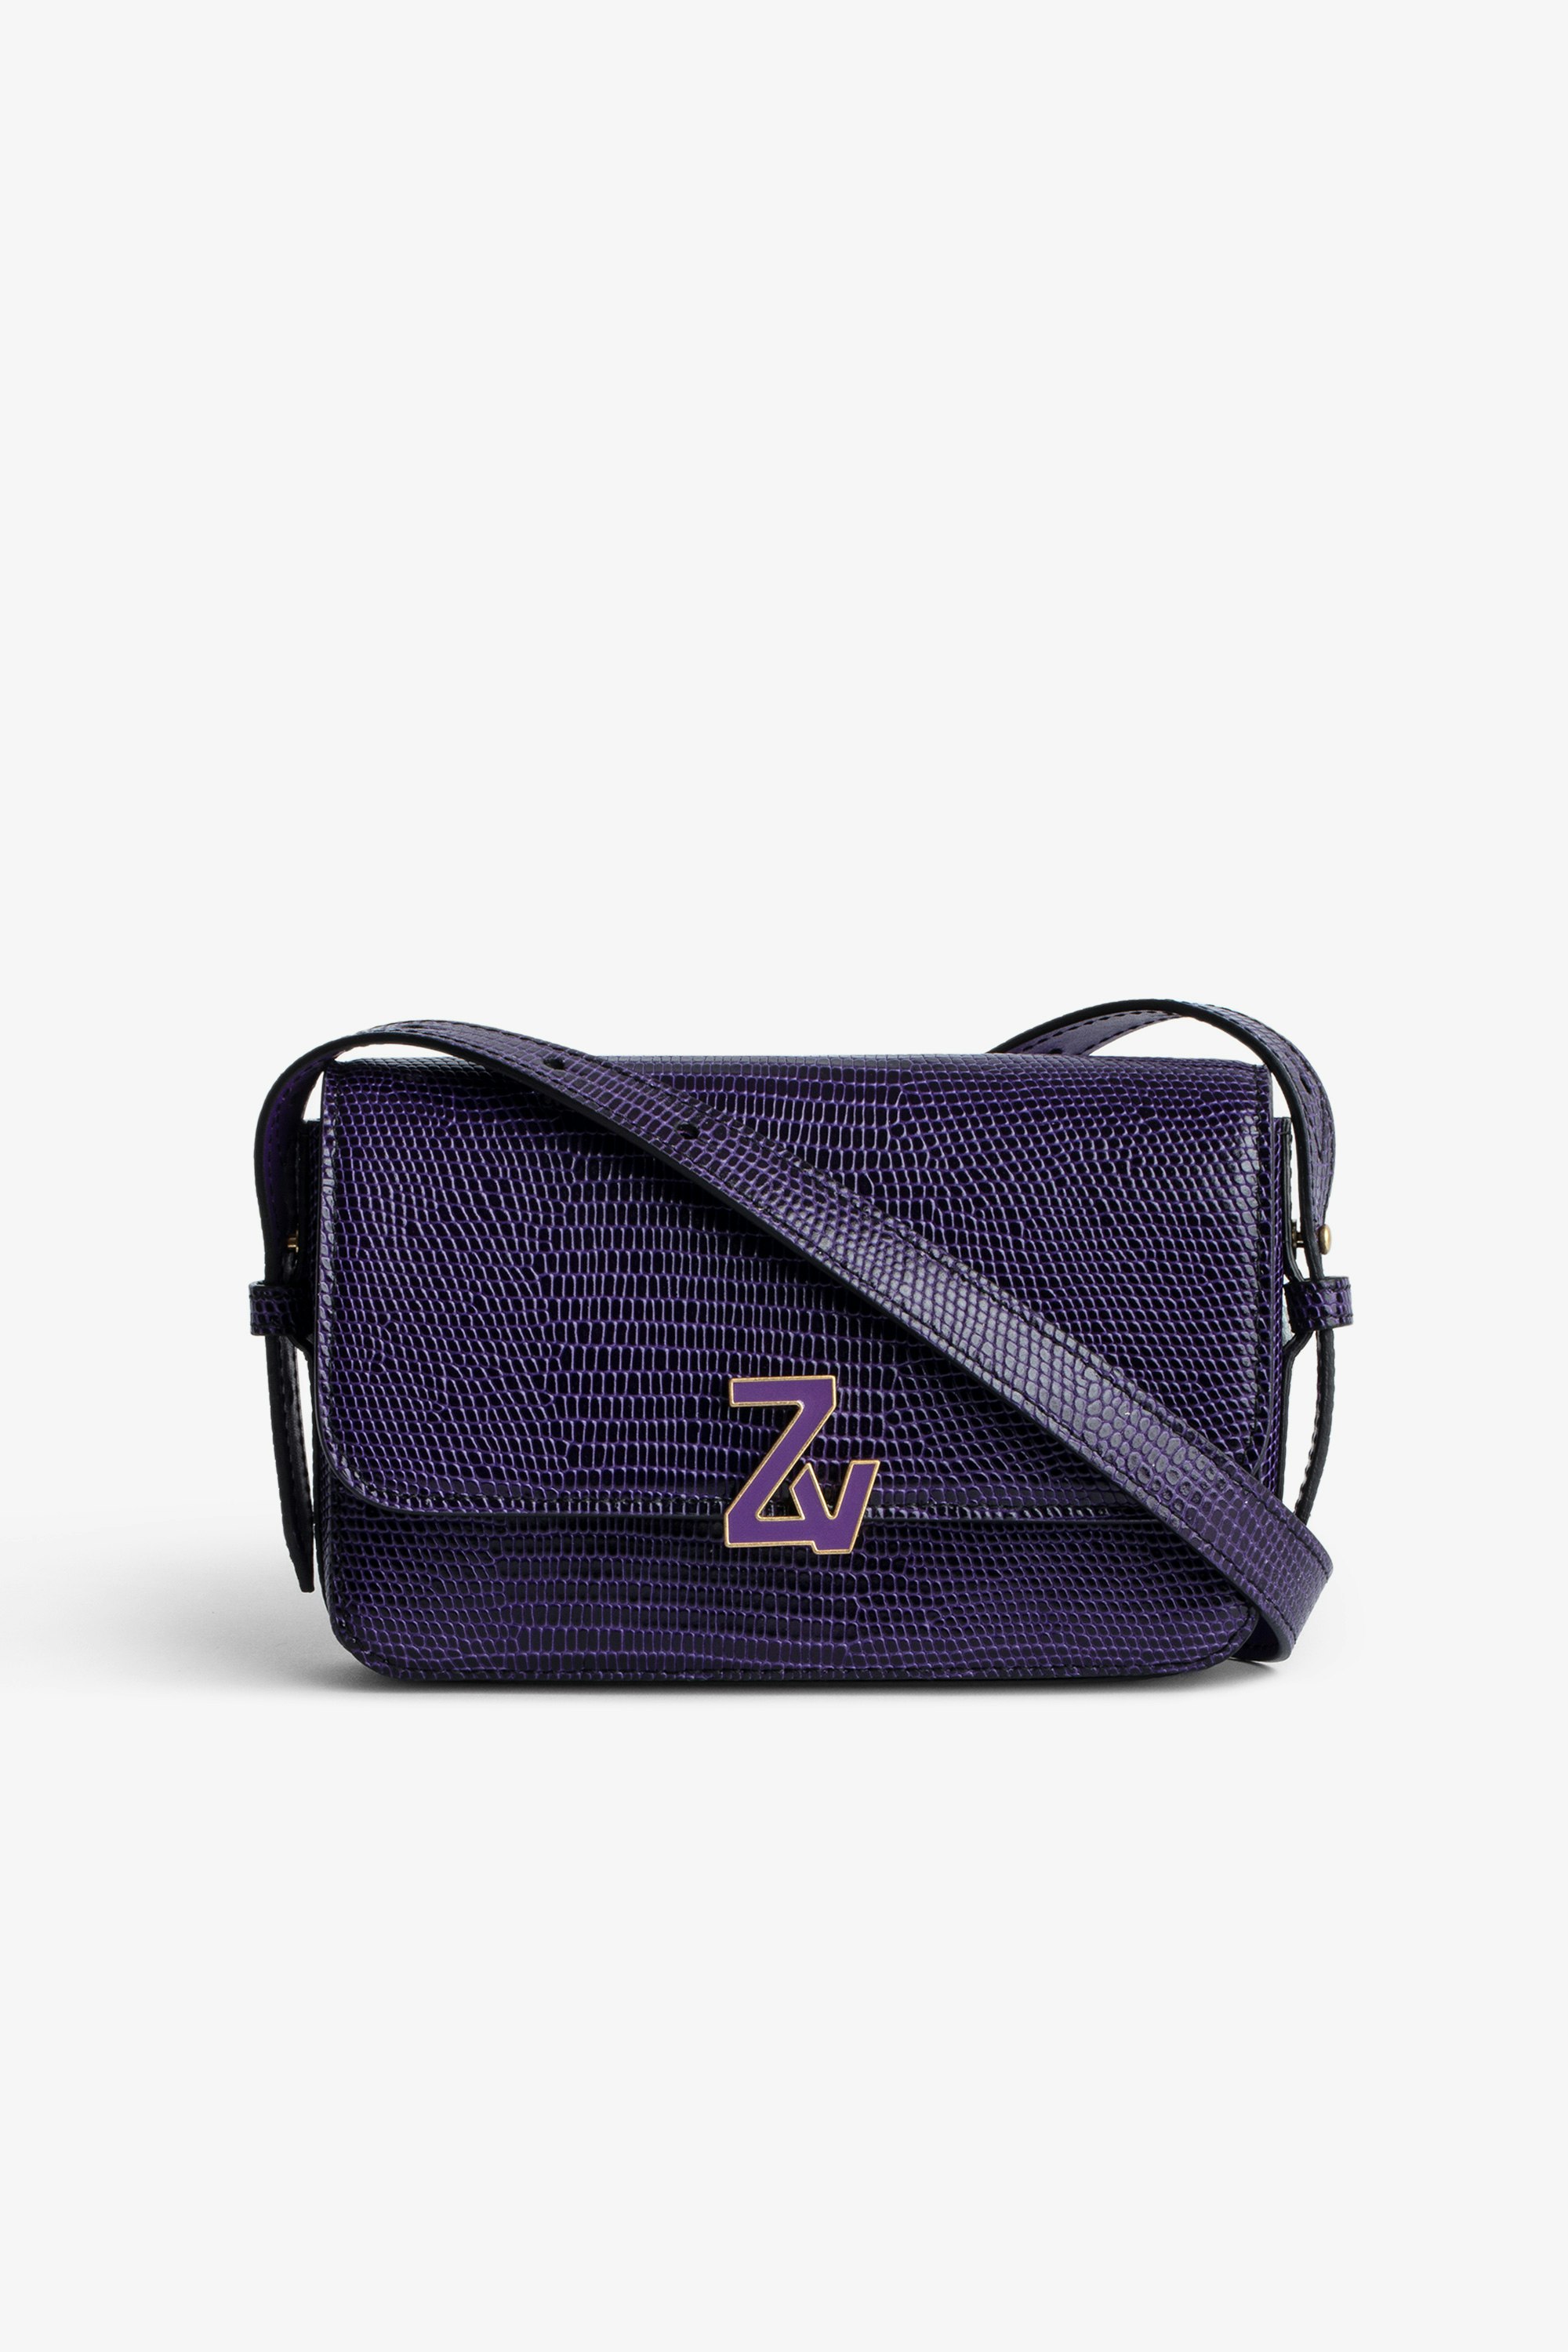 Le Mini ZV Initiale バッグ Women’s Le Mini ZV Initiale bag in violet iguana-effect embossed leather with flap, clasp, and shoulder strap